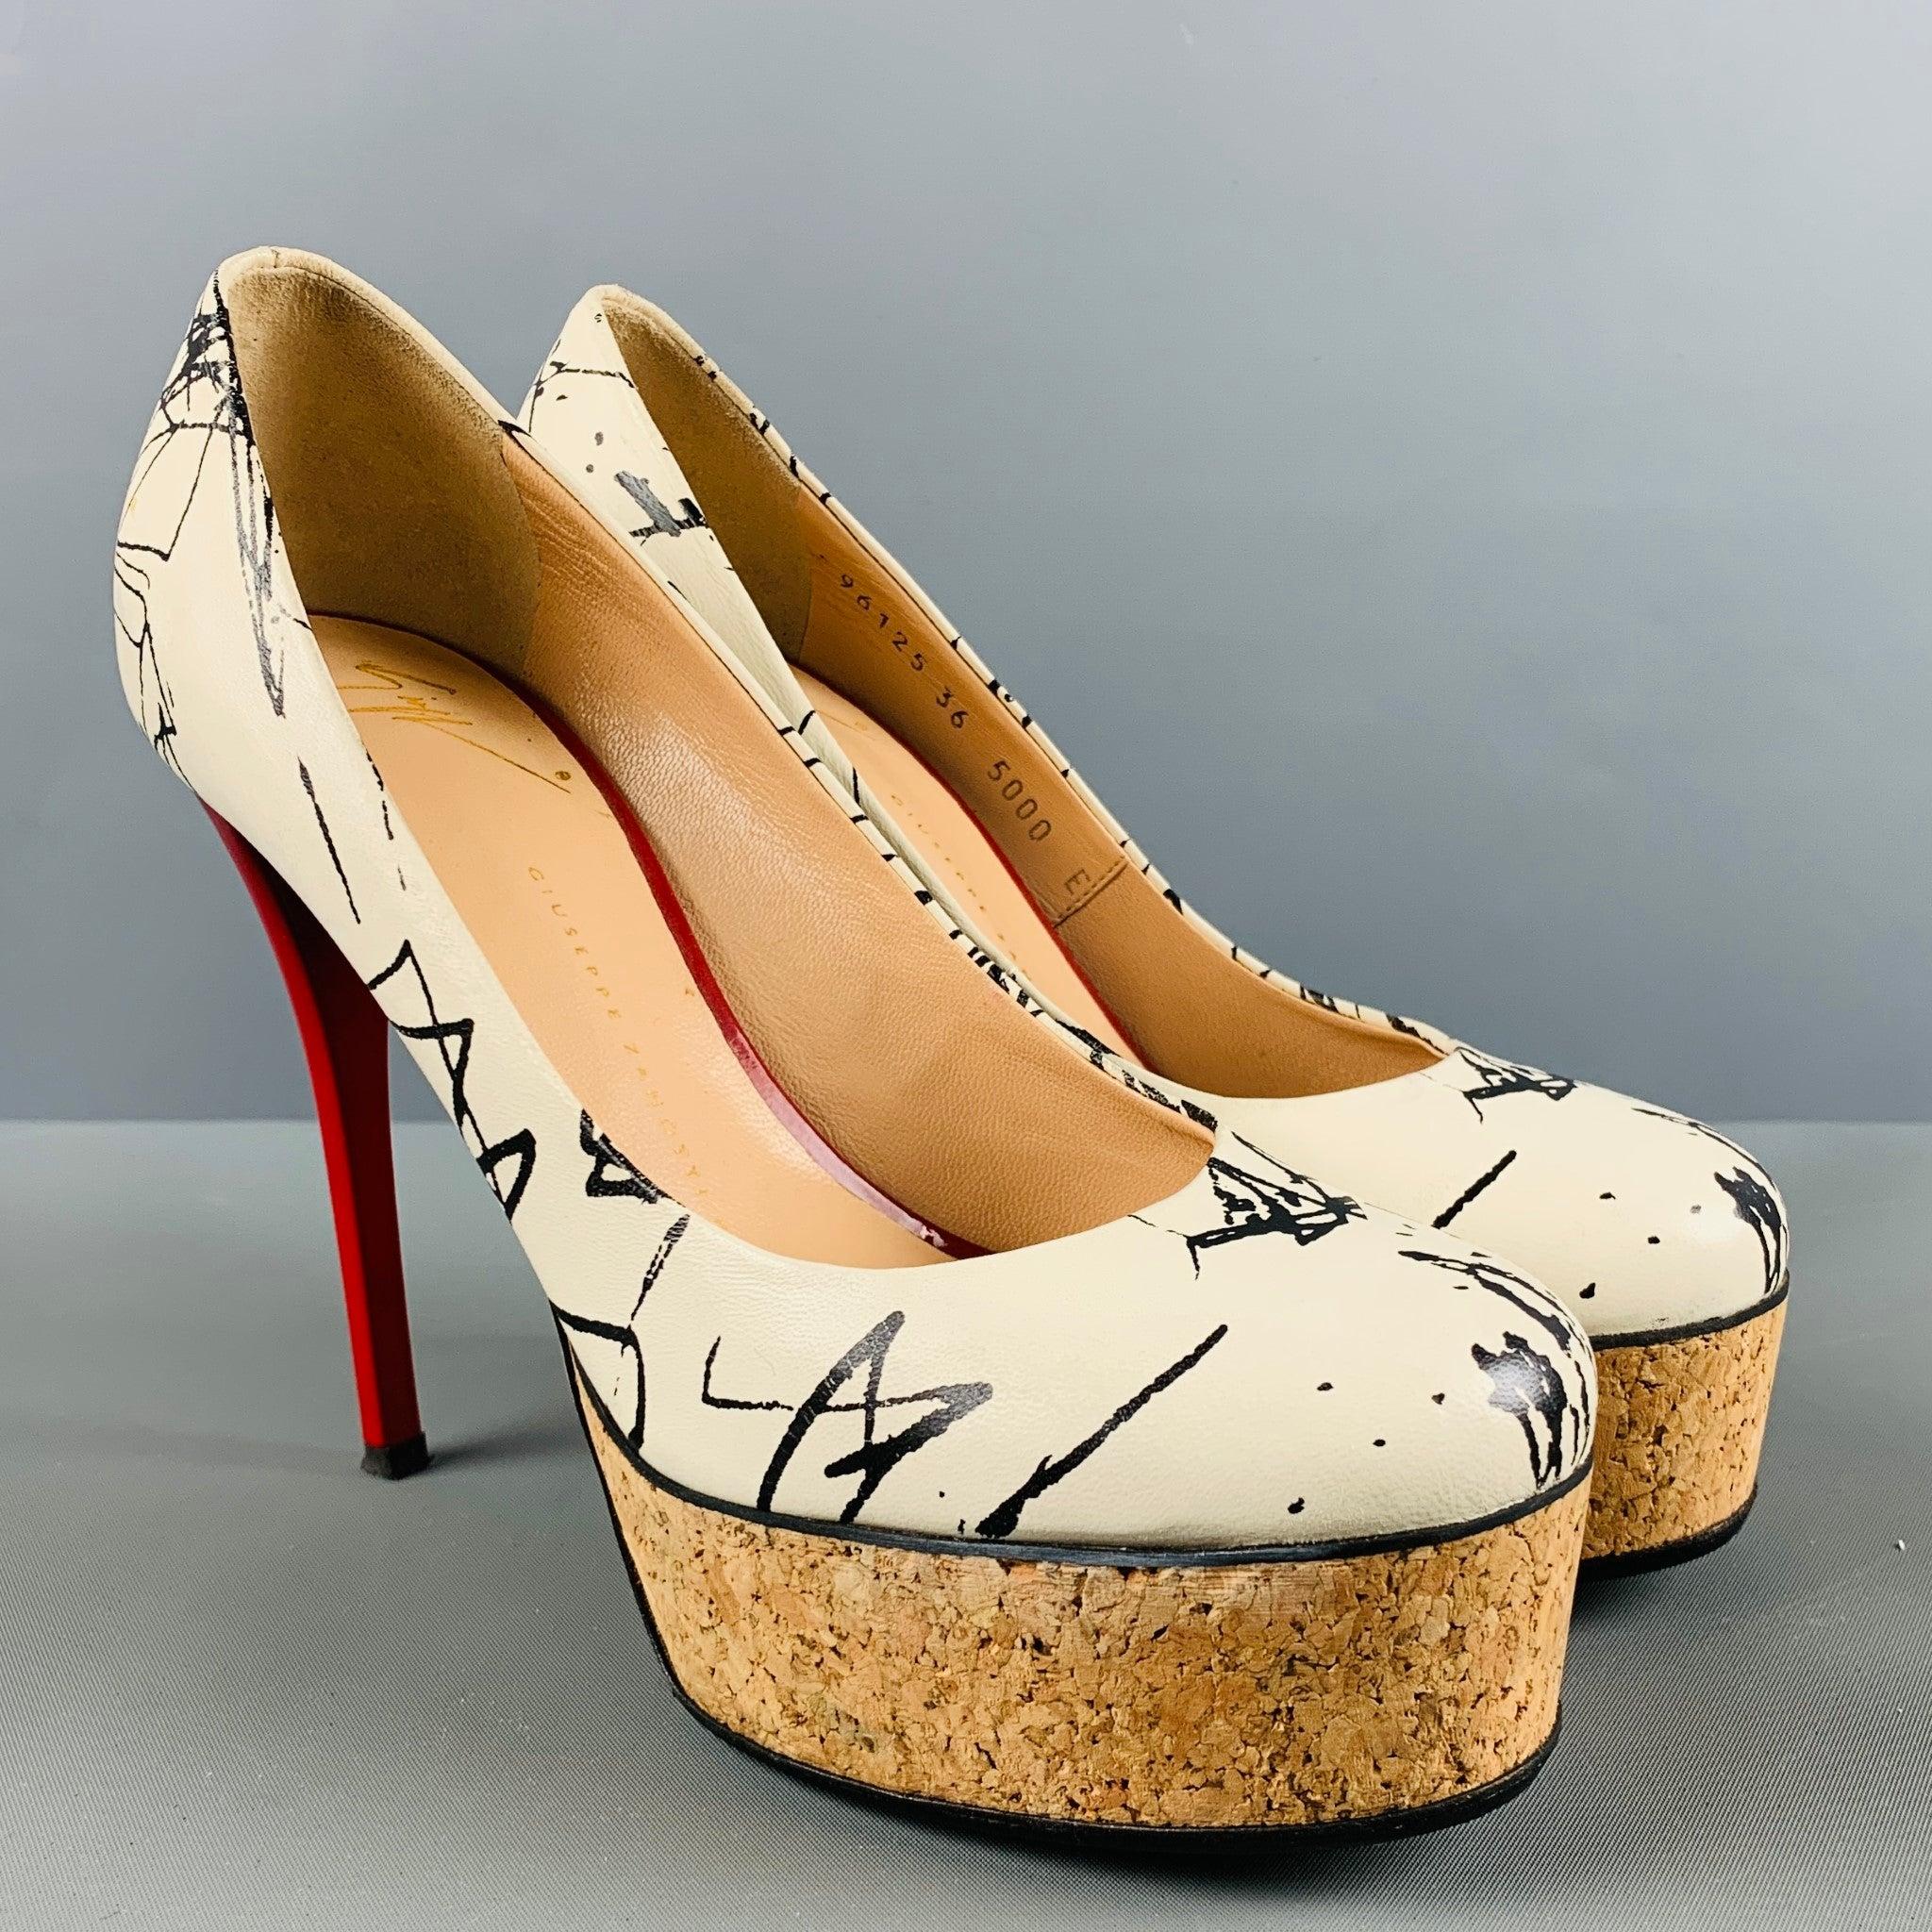 GIUSEPPE ZANOTTI pumps comes in a cream and black leather featuring a platform, red sole, and a stiletto heel. Made in Italy. Excellent Good Pre-Owned Condition.  

Marked:   96125 36 5000 E 

Measurements: 
  Heel: 5 inches Platform: 1.5 inches  
 